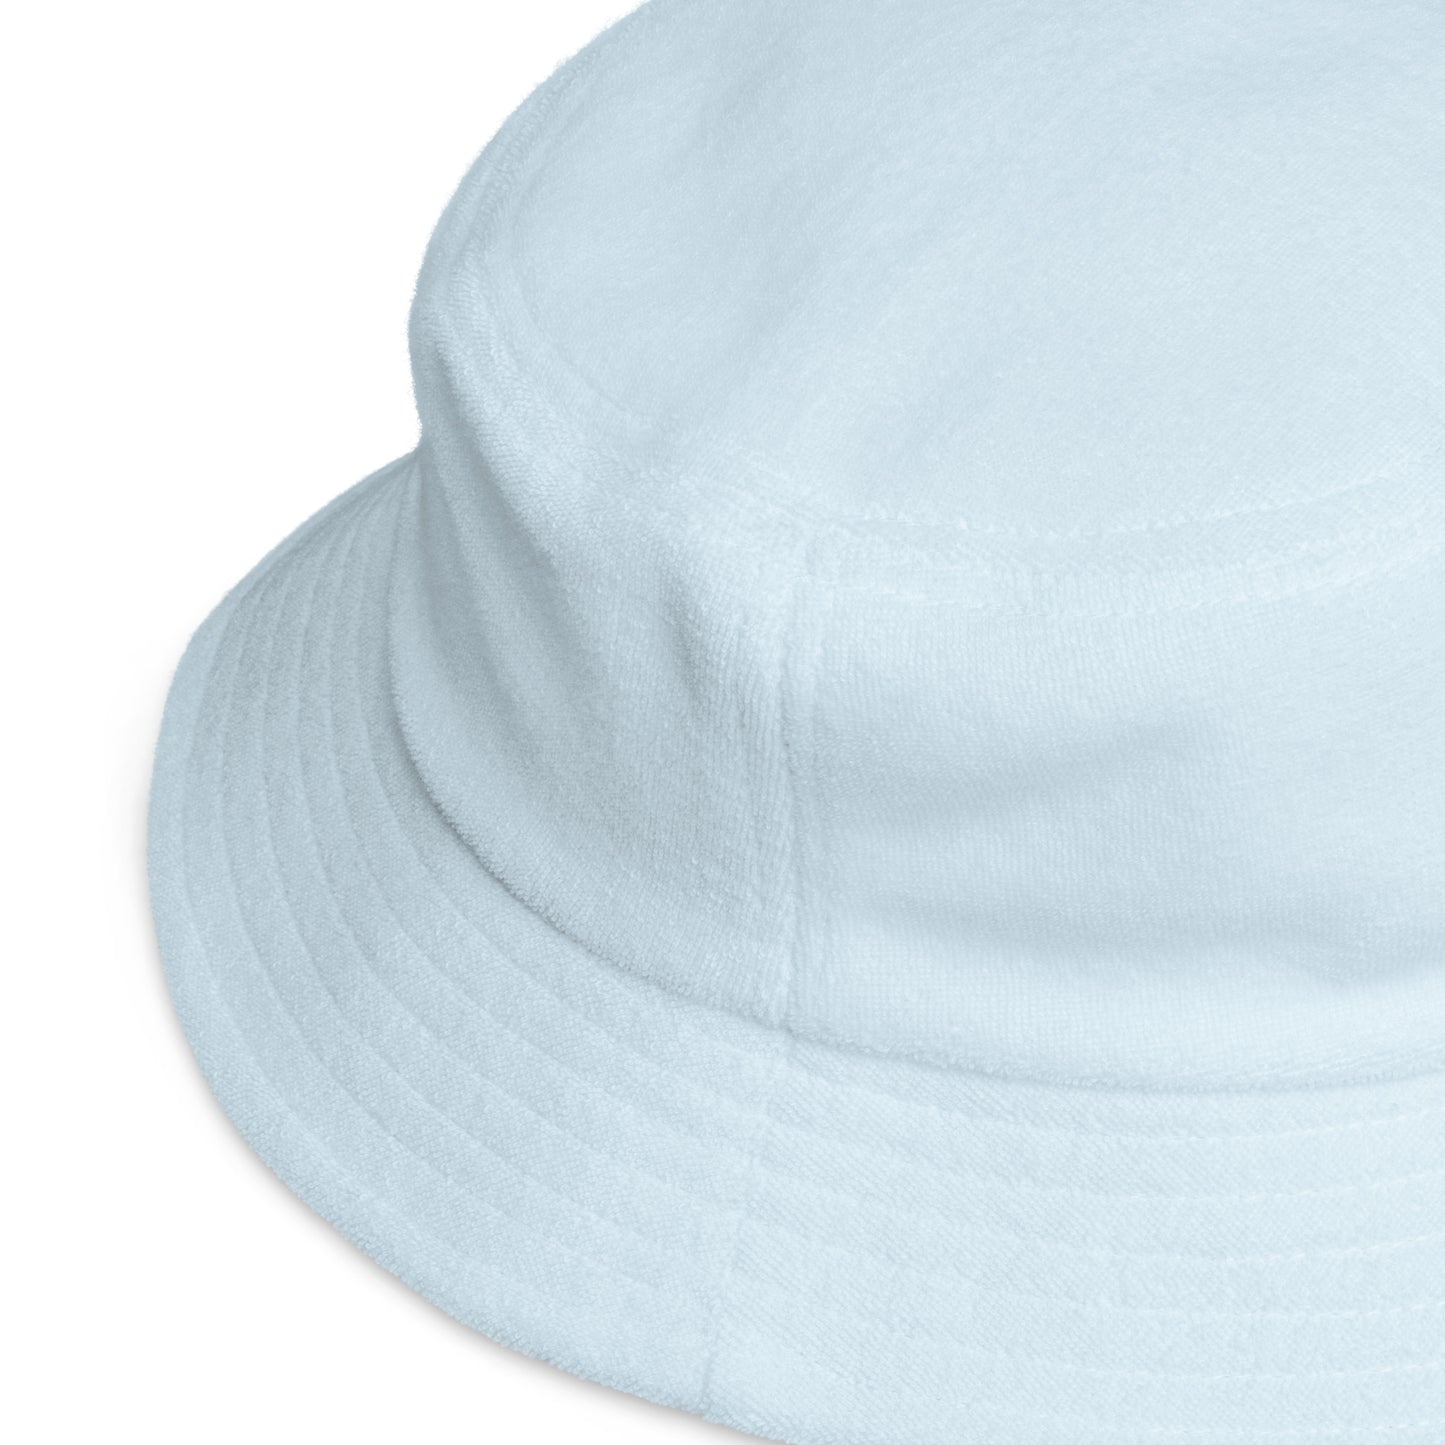 Jakes Octopus Terry Cloth Bucket Hat in Multiple Colors